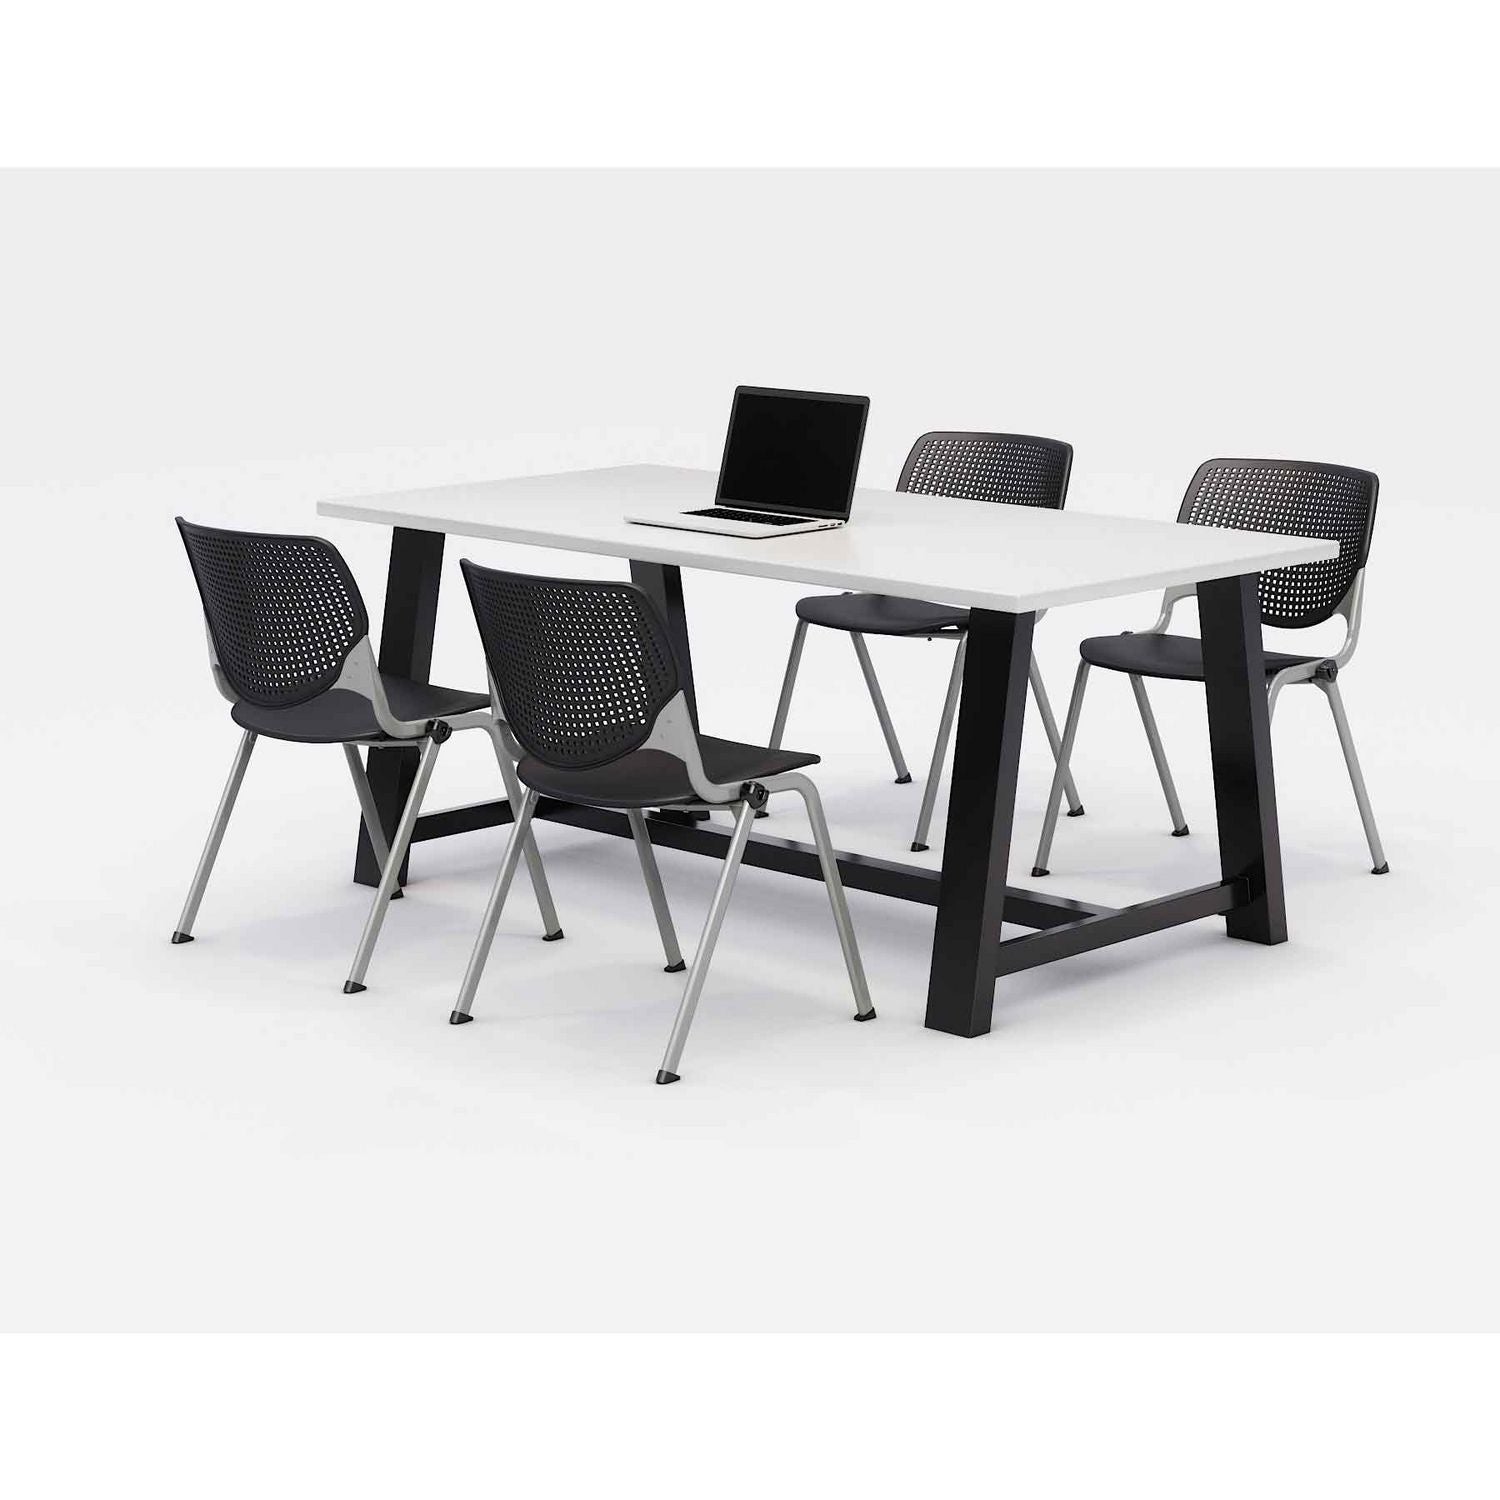 midtown-dining-table-with-four-black-kool-series-chairs-36-x-72-x-30-designer-white-ships-in-4-6-business-days_kfi840031900272 - 1